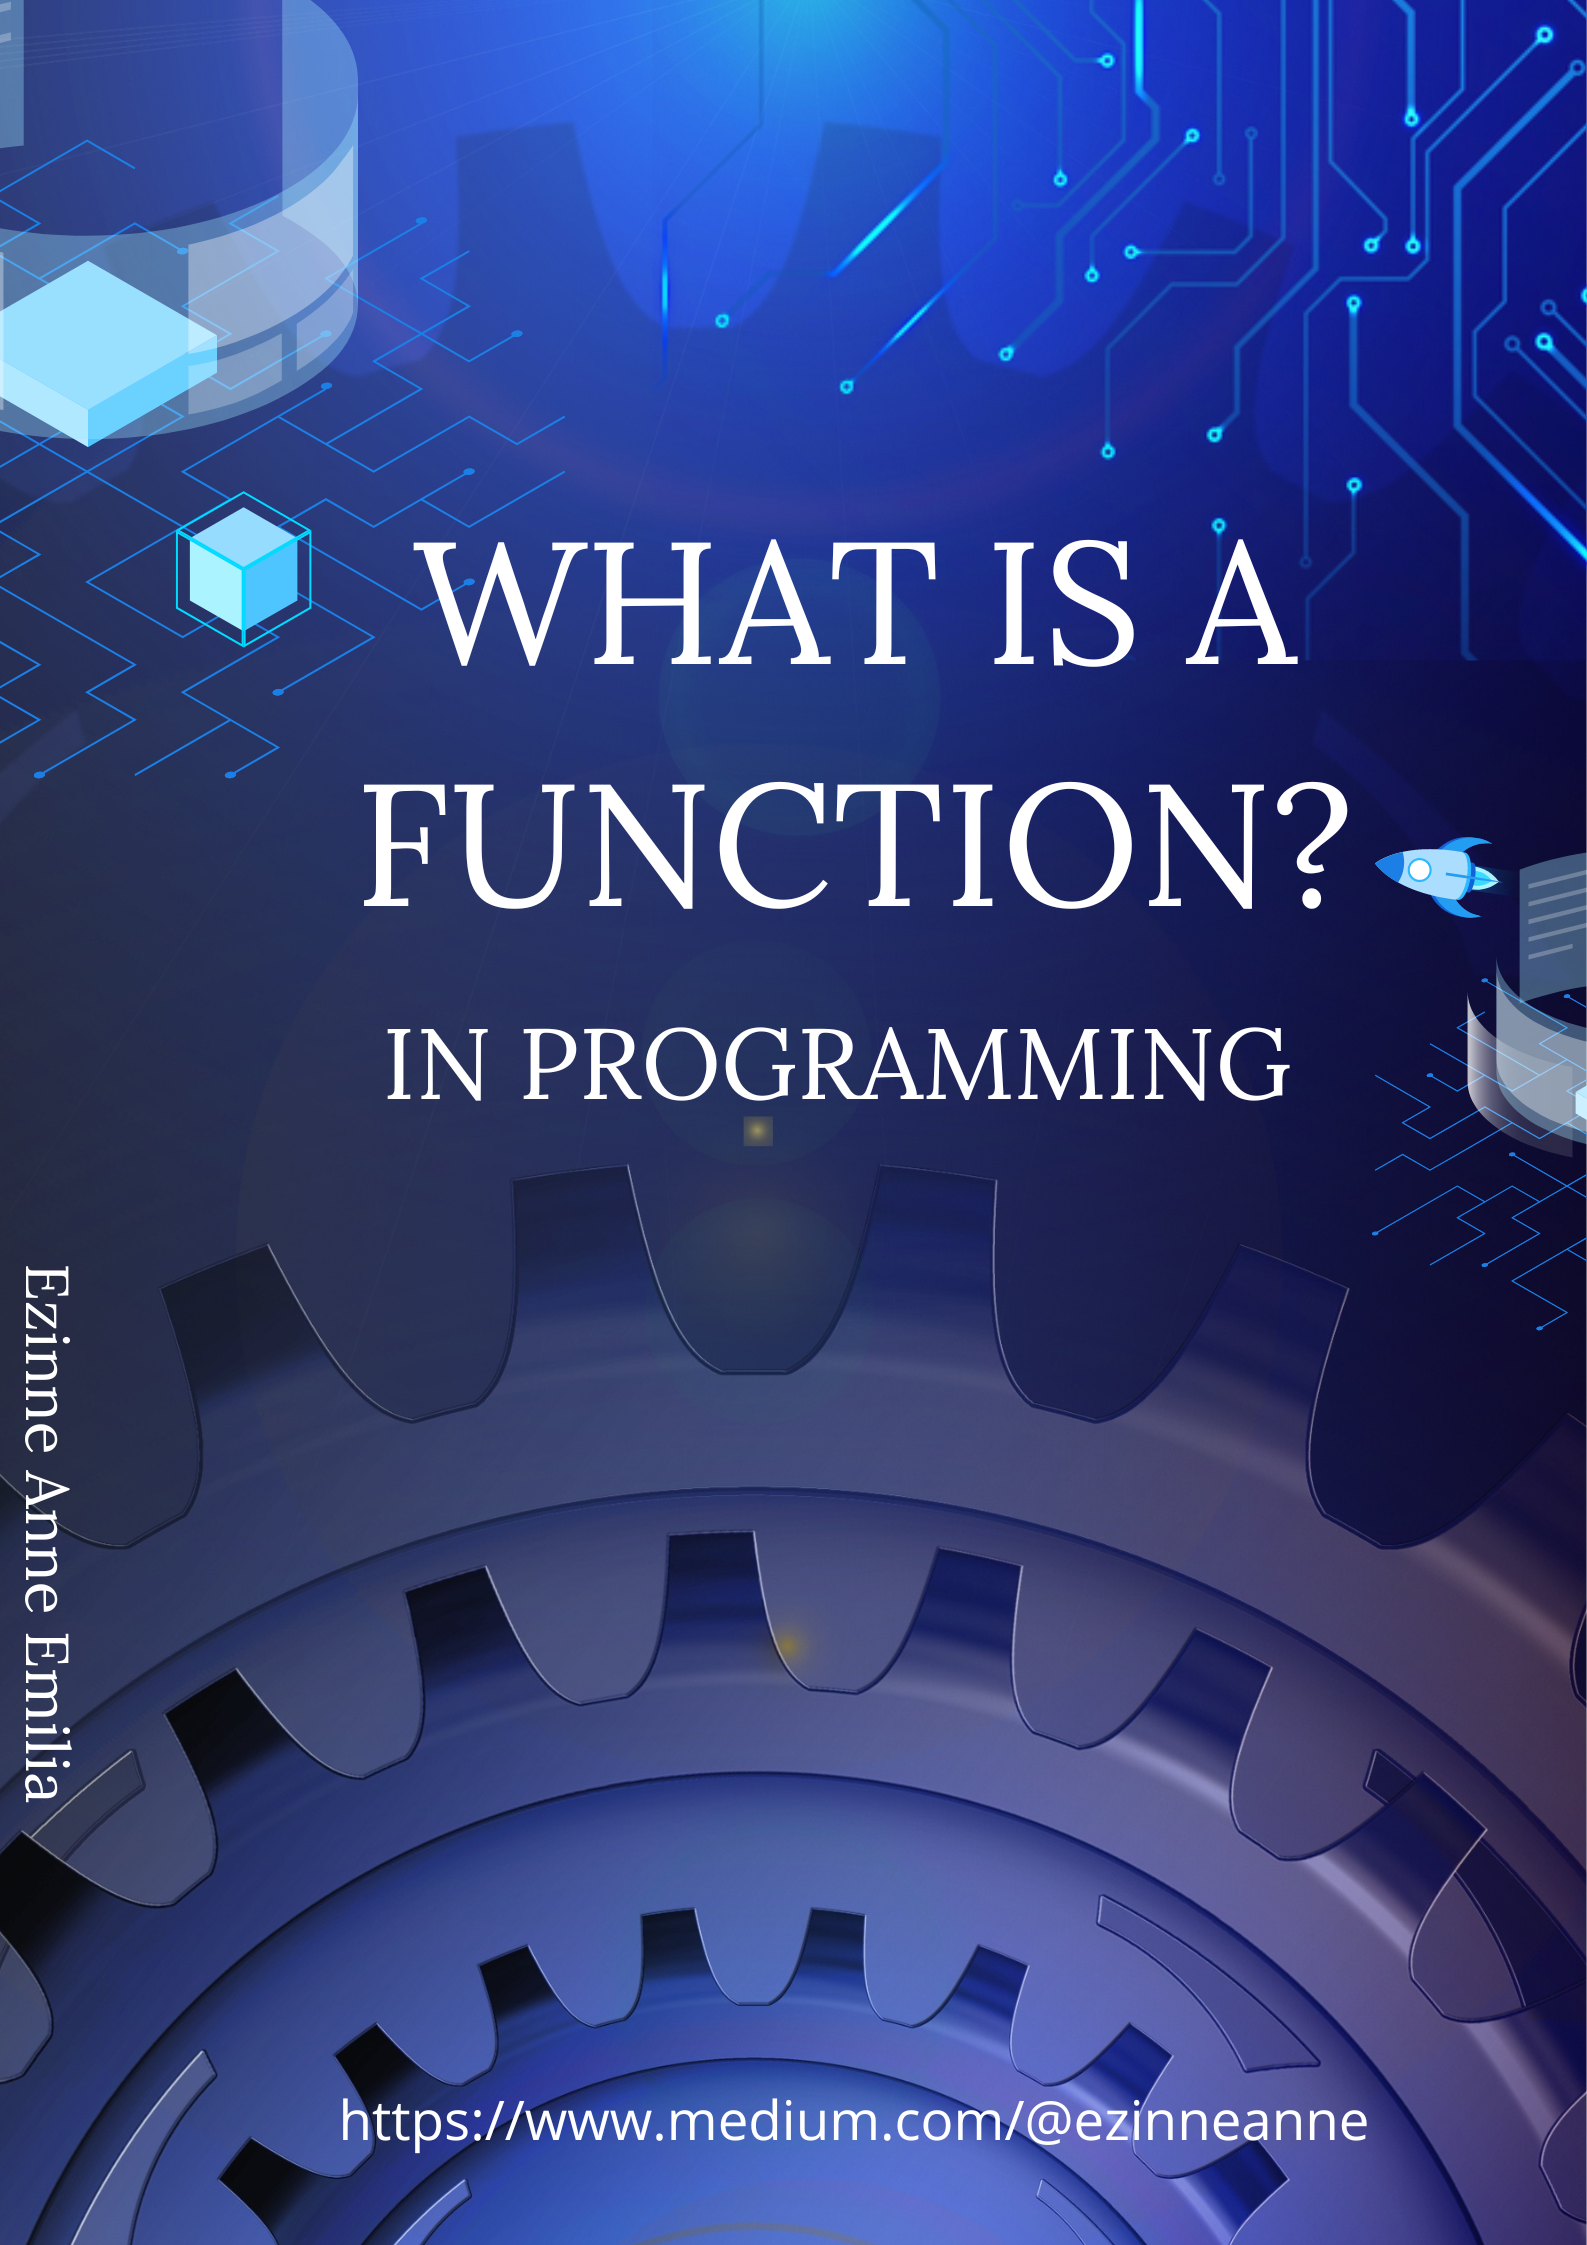 "What is a function" text written with the writer's name and blog address